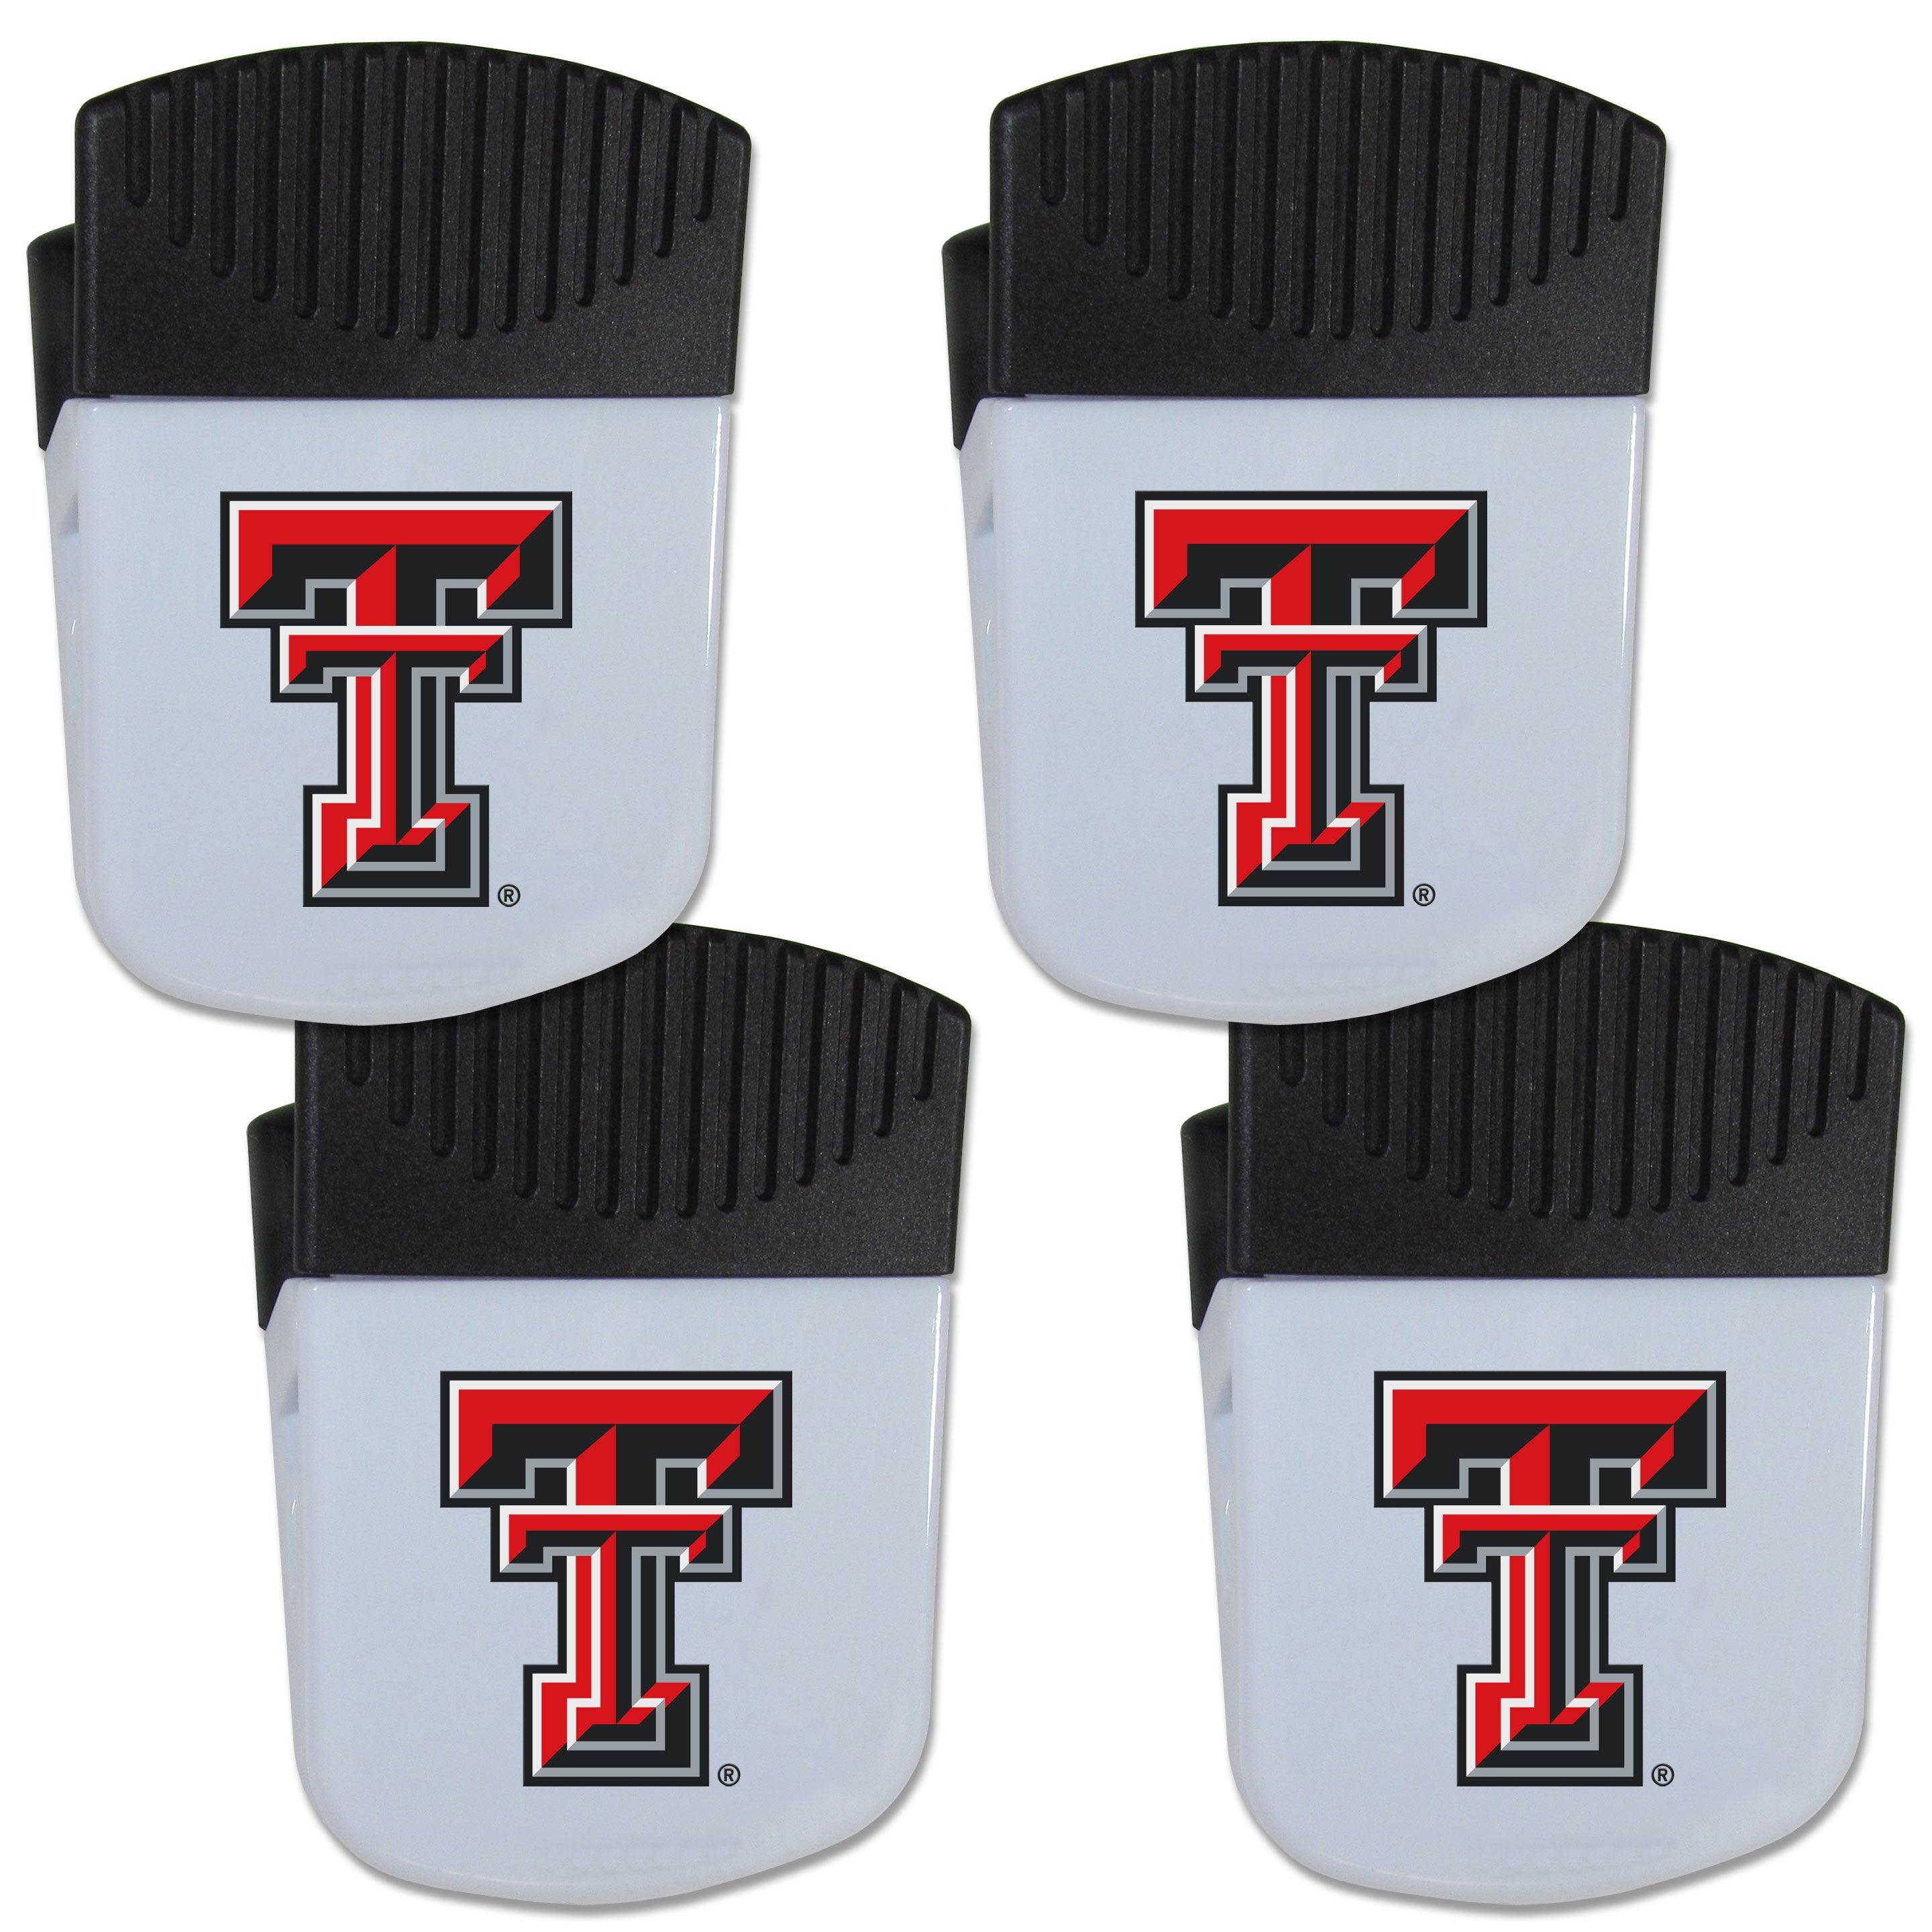 Texas Tech Raiders Chip Clip Magnet with Bottle Opener, 4 pack - Flyclothing LLC